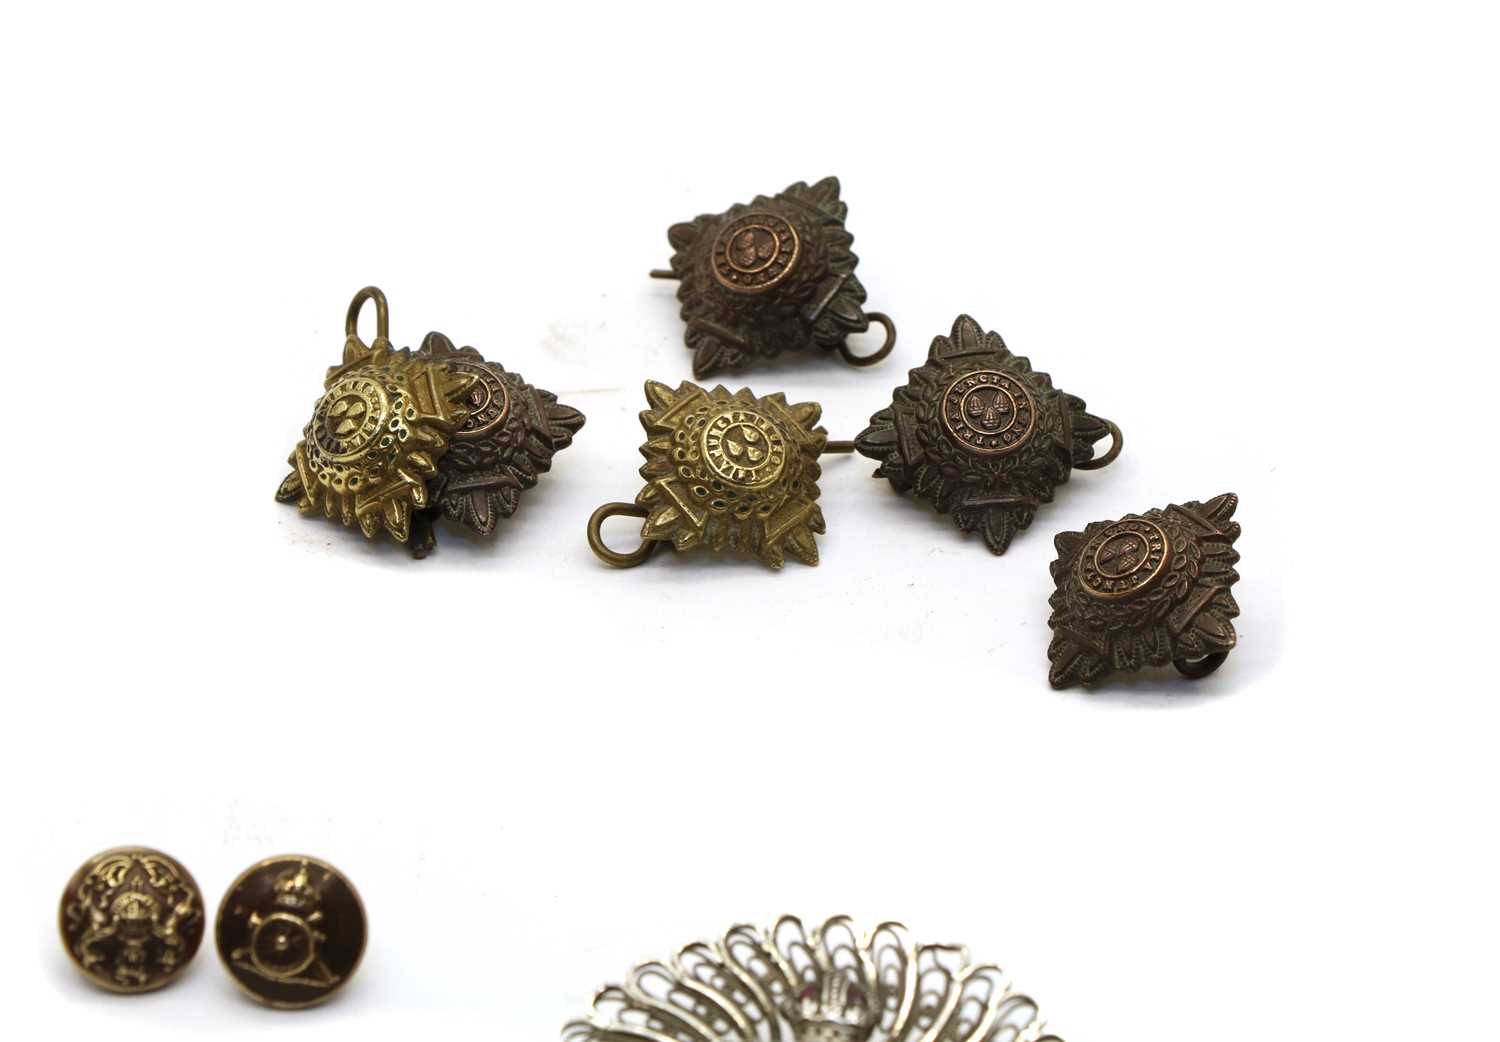 A collection of military uniform buttons, - Image 5 of 6